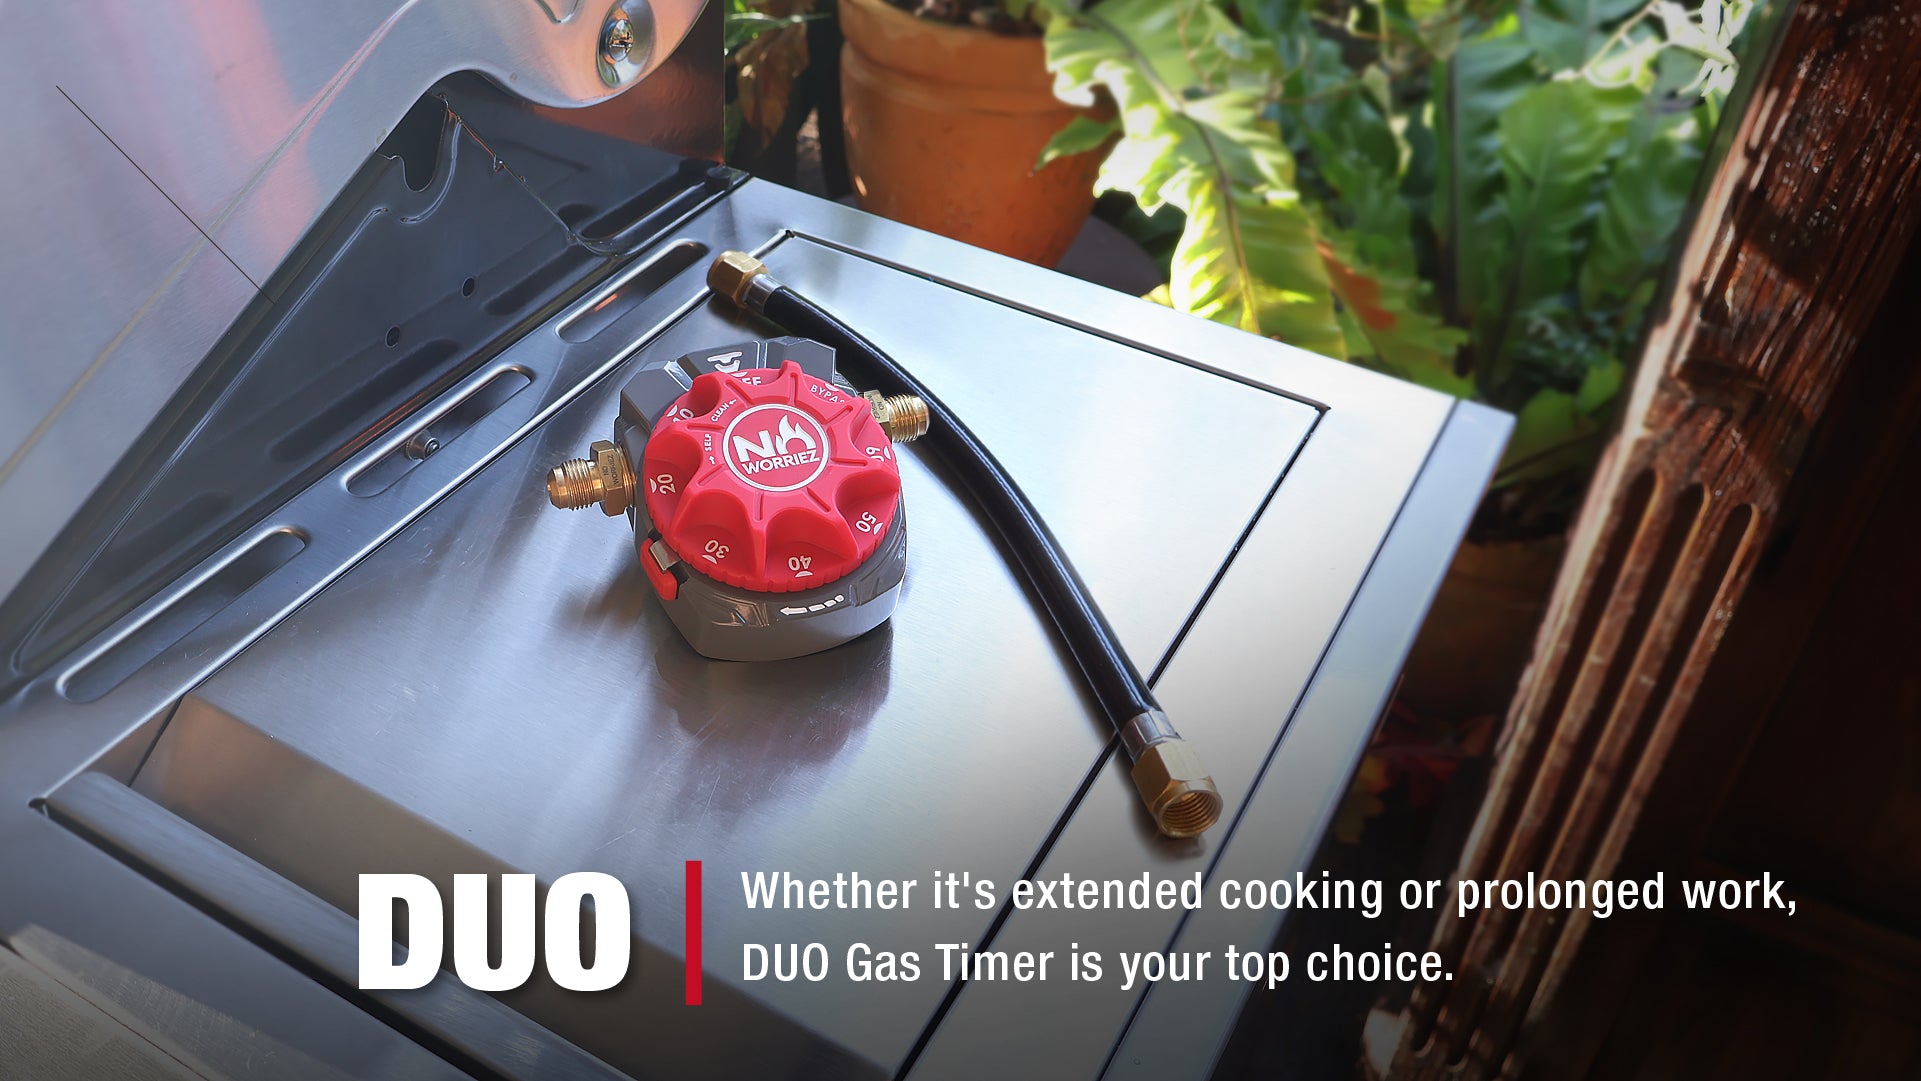 Duo gas timer is your top choice for extended cooking or prolonged work